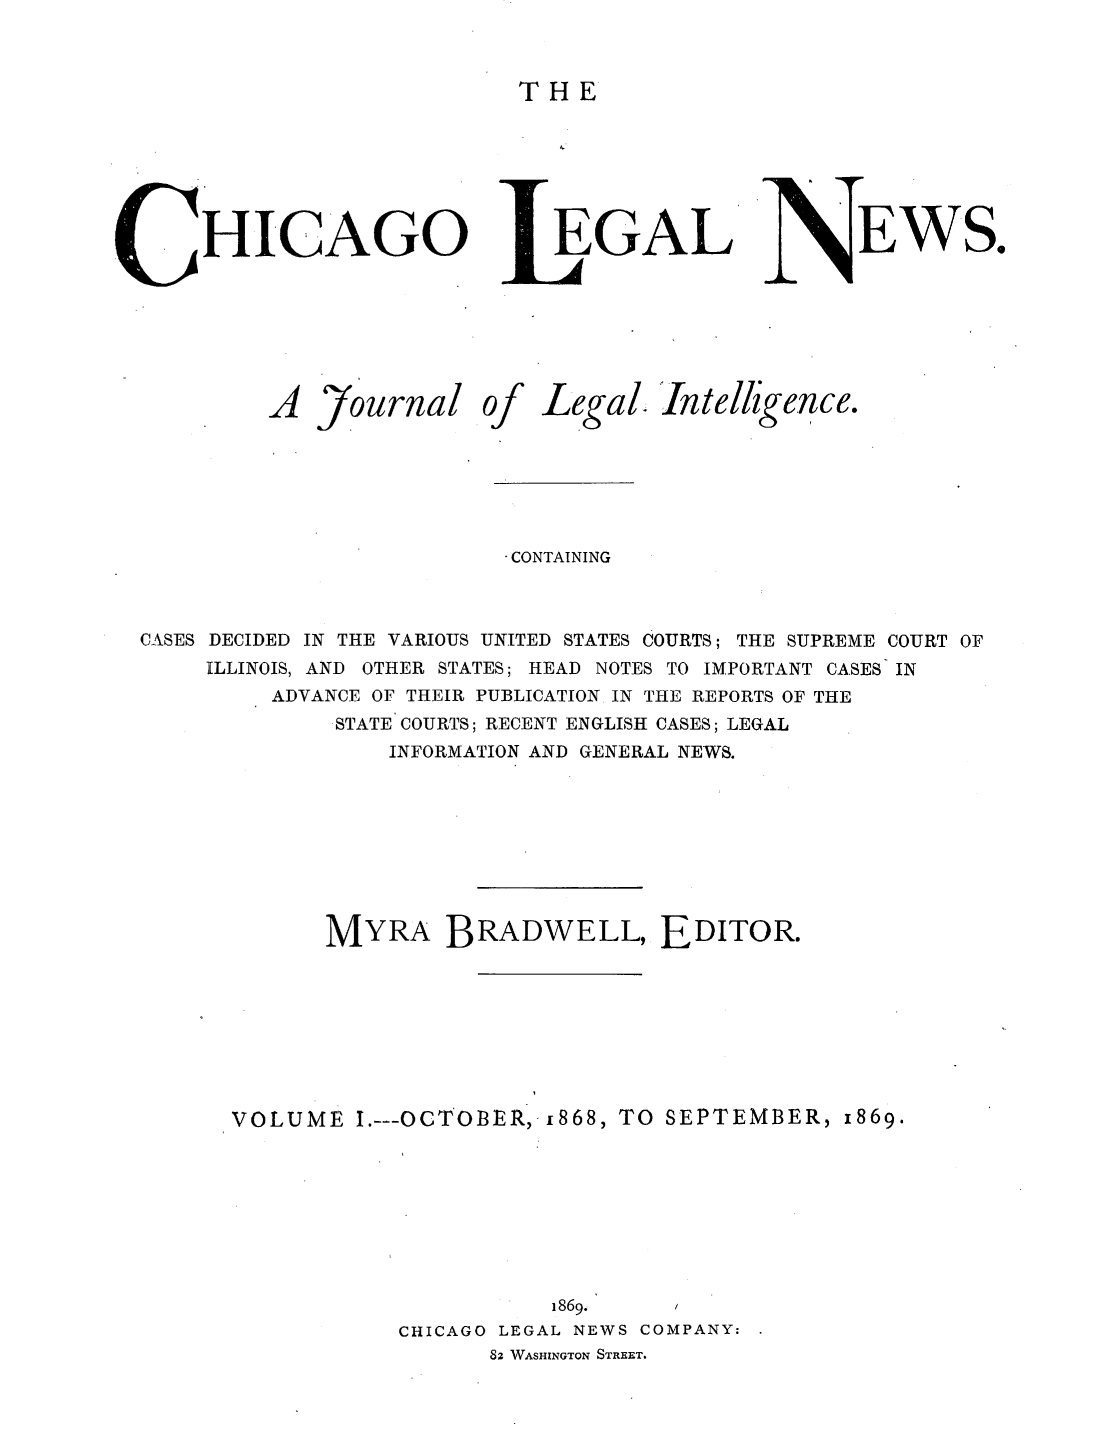 handle is hein.journals/chiclene1 and id is 1 raw text is: THEC HICAGOEGALEWS.A Journal ofLegal. Intelligence.- CONTAININGCASES DECIDED IN THE VARIOUS UNITED STATES COURTS; THE SUPREME COURT OFILLINOIS, AND OTHER STATES; HEAD NOTES TO IMPORTANT CASES INADVANCE OF THEIR PUBLICATION IN THE REPORTS OF THESTATE COURTS; RECENT ENGLISH CASES; LEGALINFORMATION AND GENERAL NEWS.MYRA BRADWELL, EDITOR.VOLUME I.---OCTOBER, i868, TO SEPTEMBER, 1869.1869.     /CHICAGO LEGAL NEWS COMPANY:83 WASHINGTON STREET.